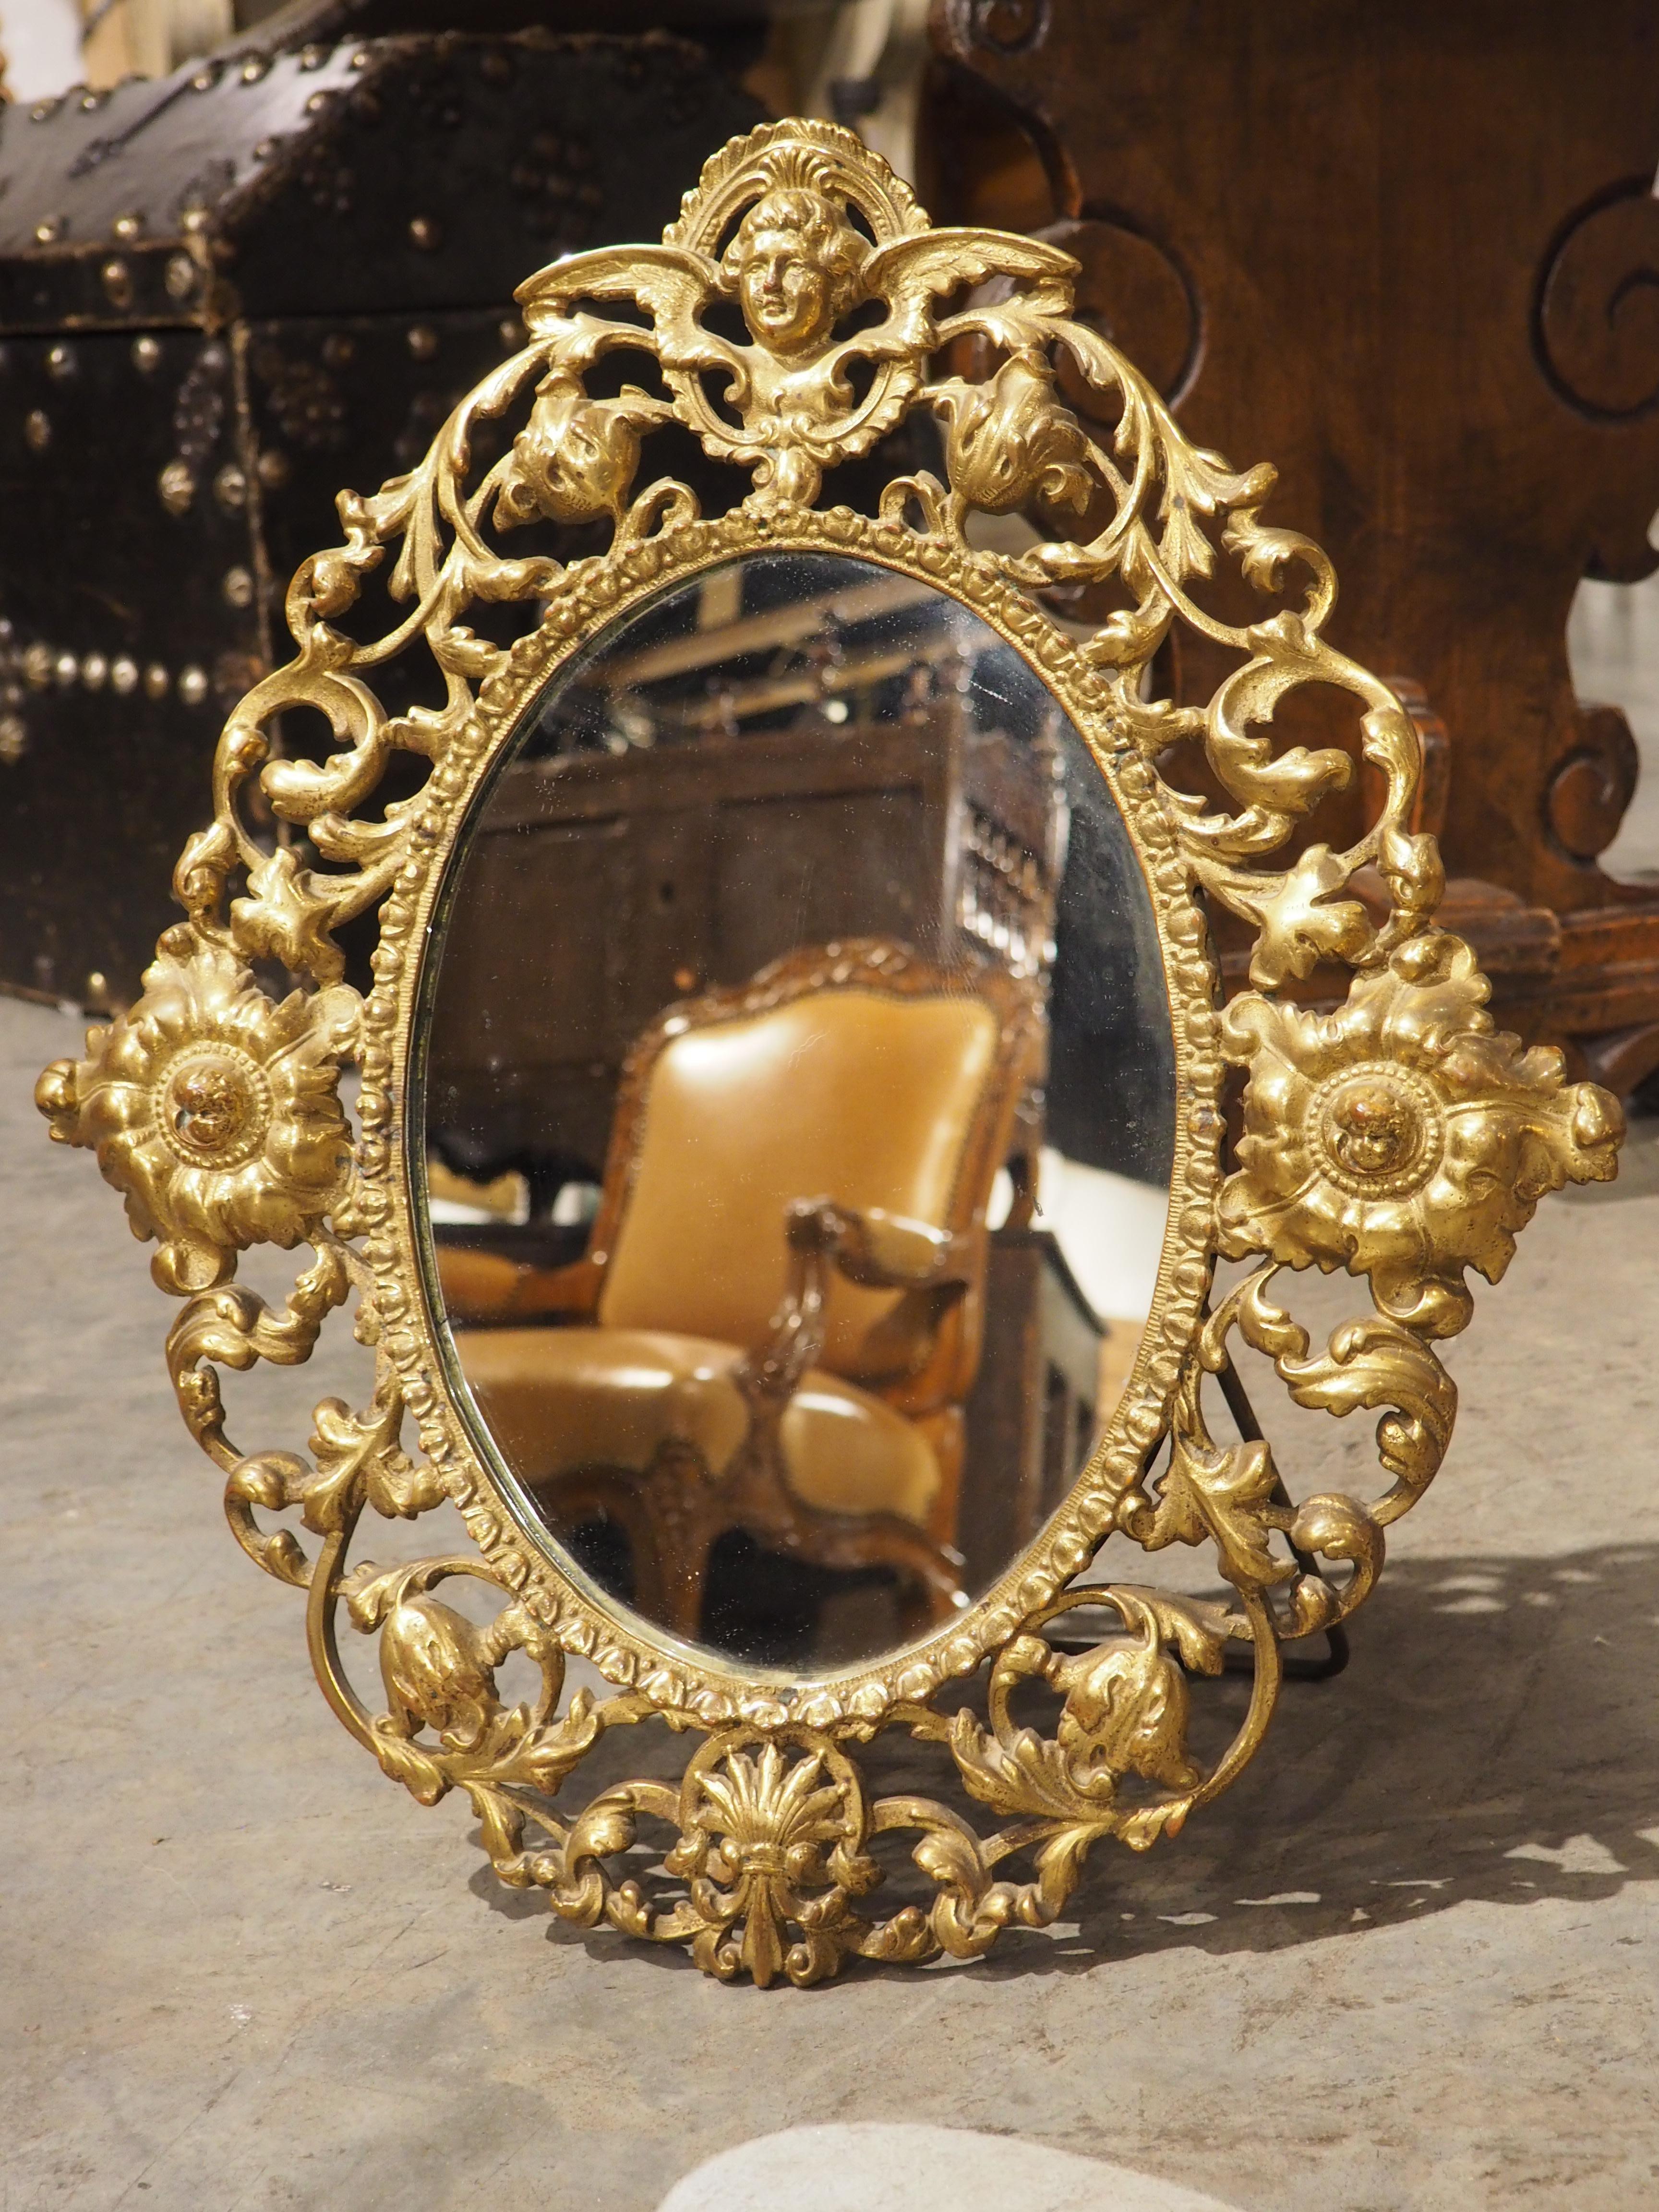 Circa 1900 Oval Gilt Bronze Table Mirror from Italy For Sale 7